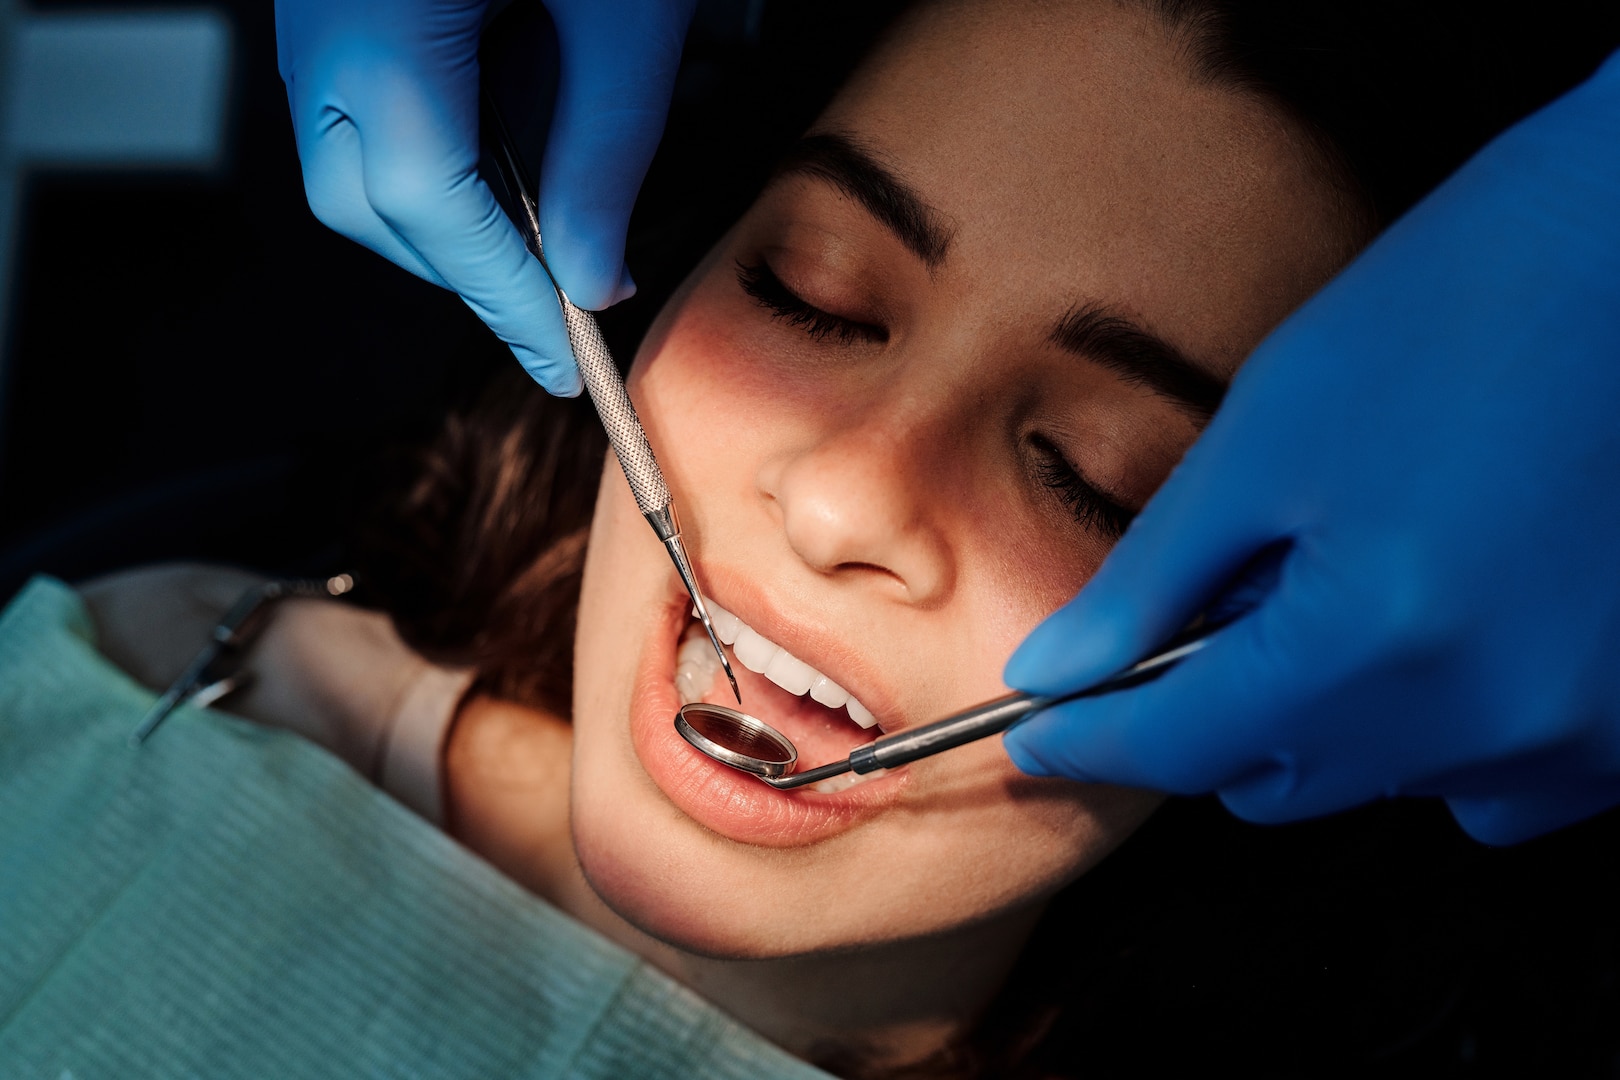 A dentist probes a woman's teeth with dental tools